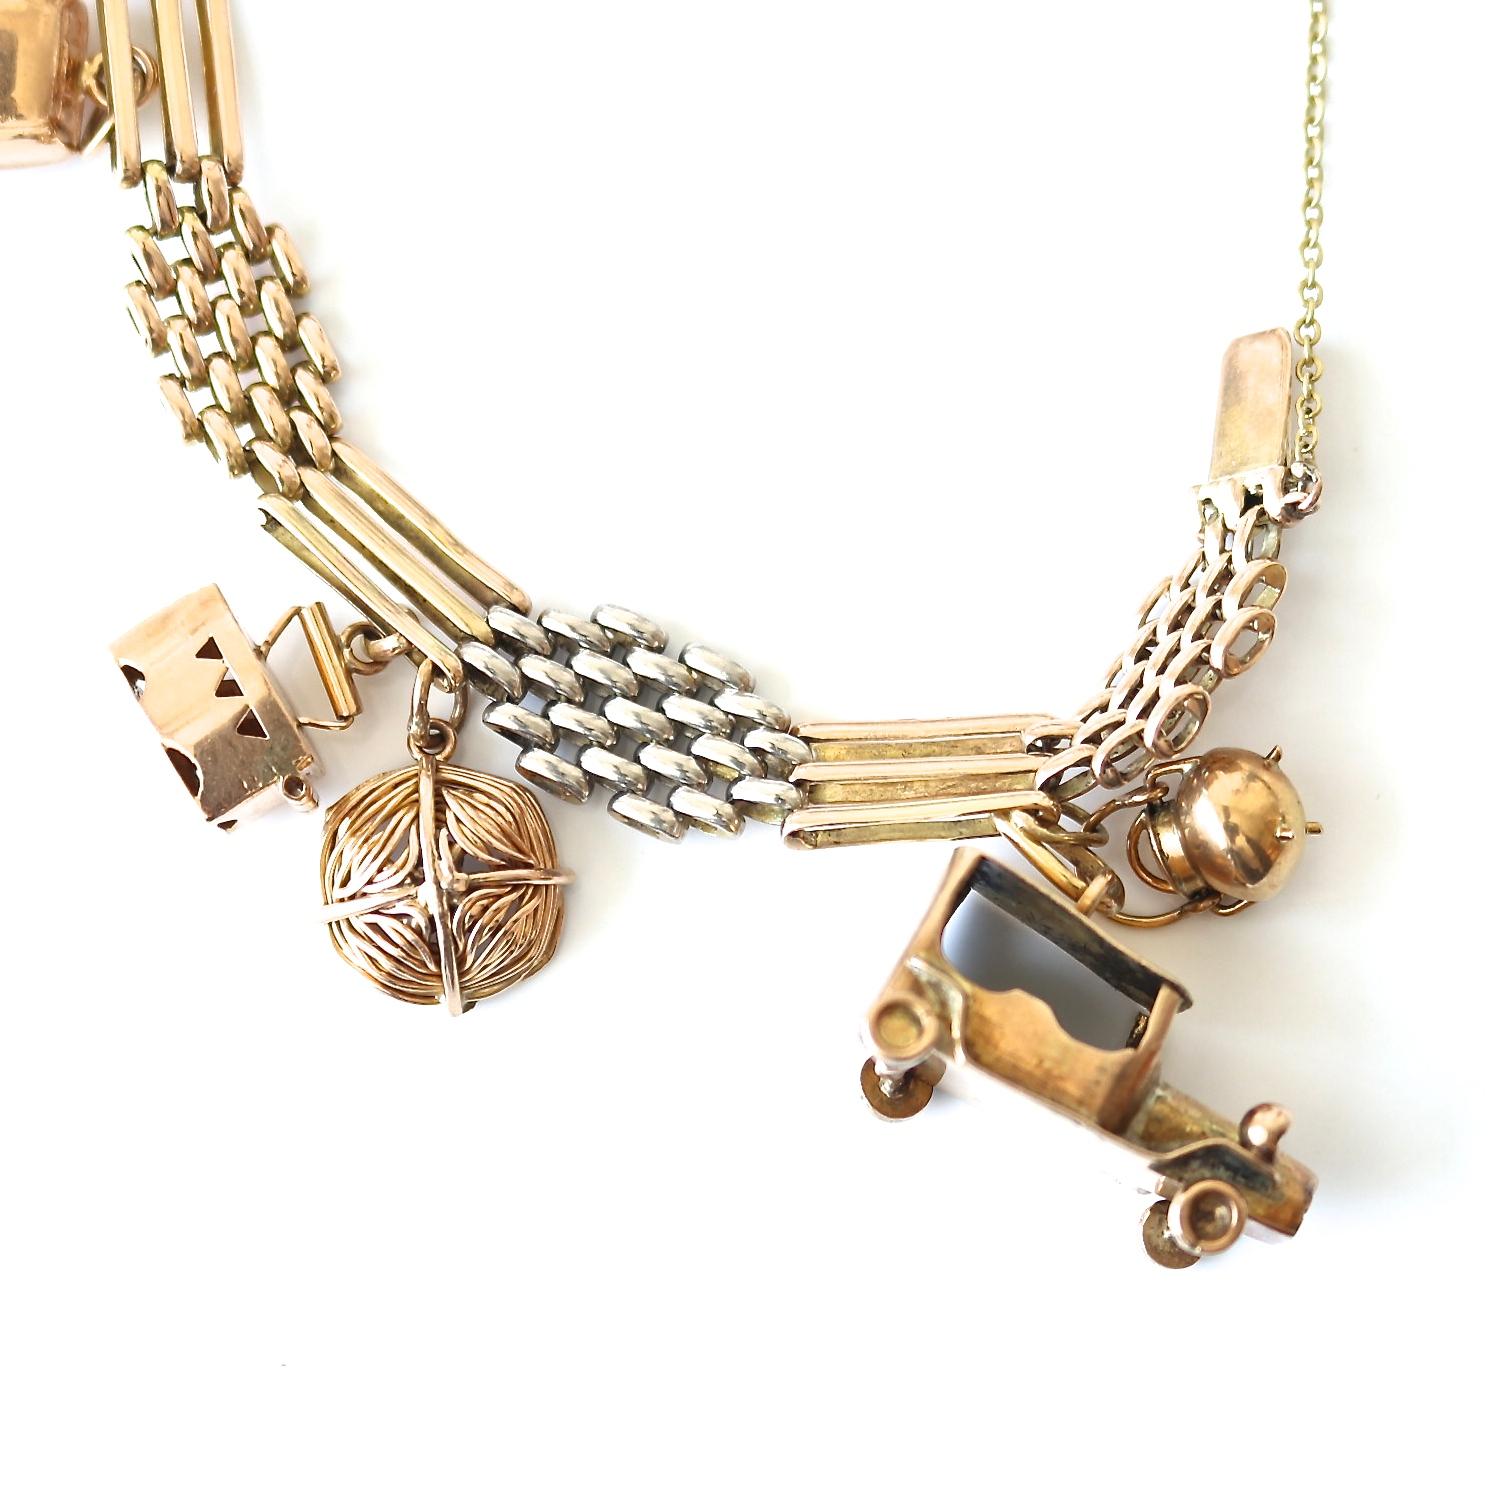 Eleven playful charms designed in 18k gold ready to fill the air with notes of whimsical fancy as you move through the day. A delight from morning to night.